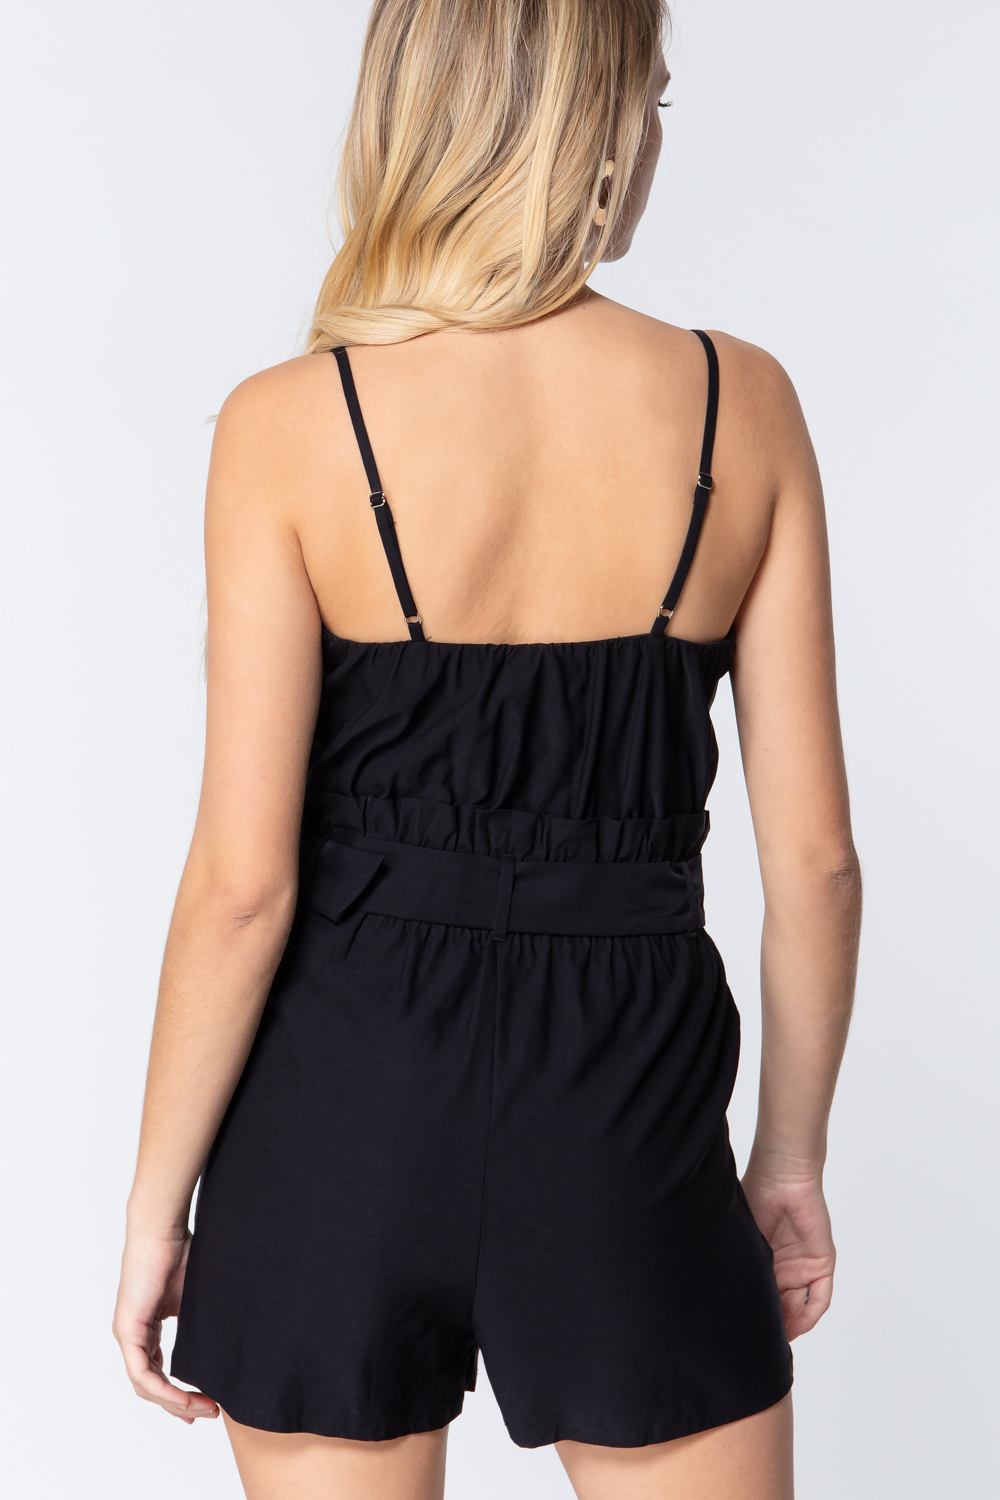 Cami Strp Belted Romper - LOLA LUXE